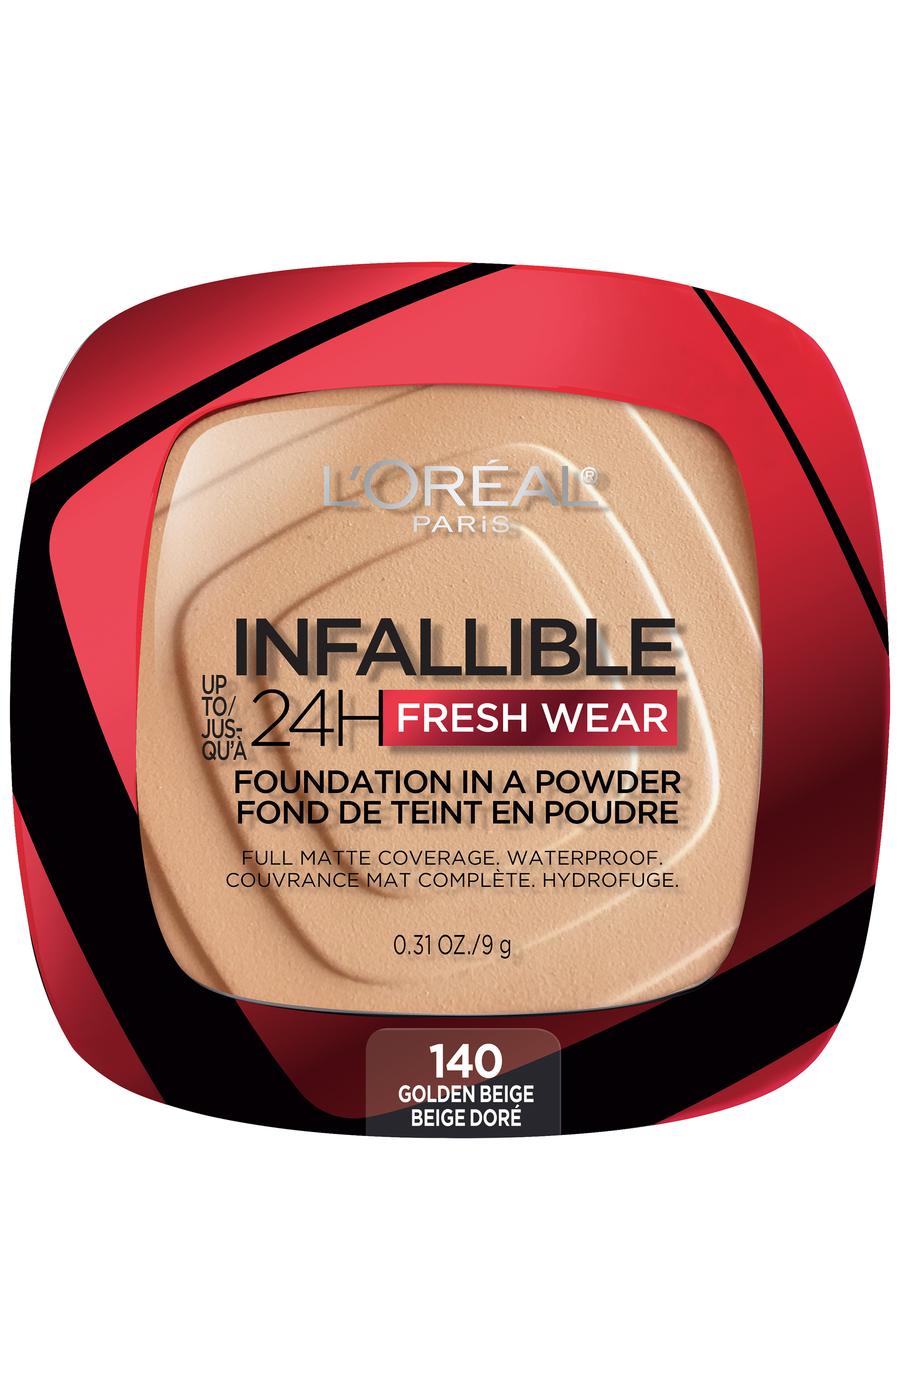 L'Oréal Paris Infallible Up to 24H Fresh Wear Foundation in a Powder Golden Beige; image 1 of 4